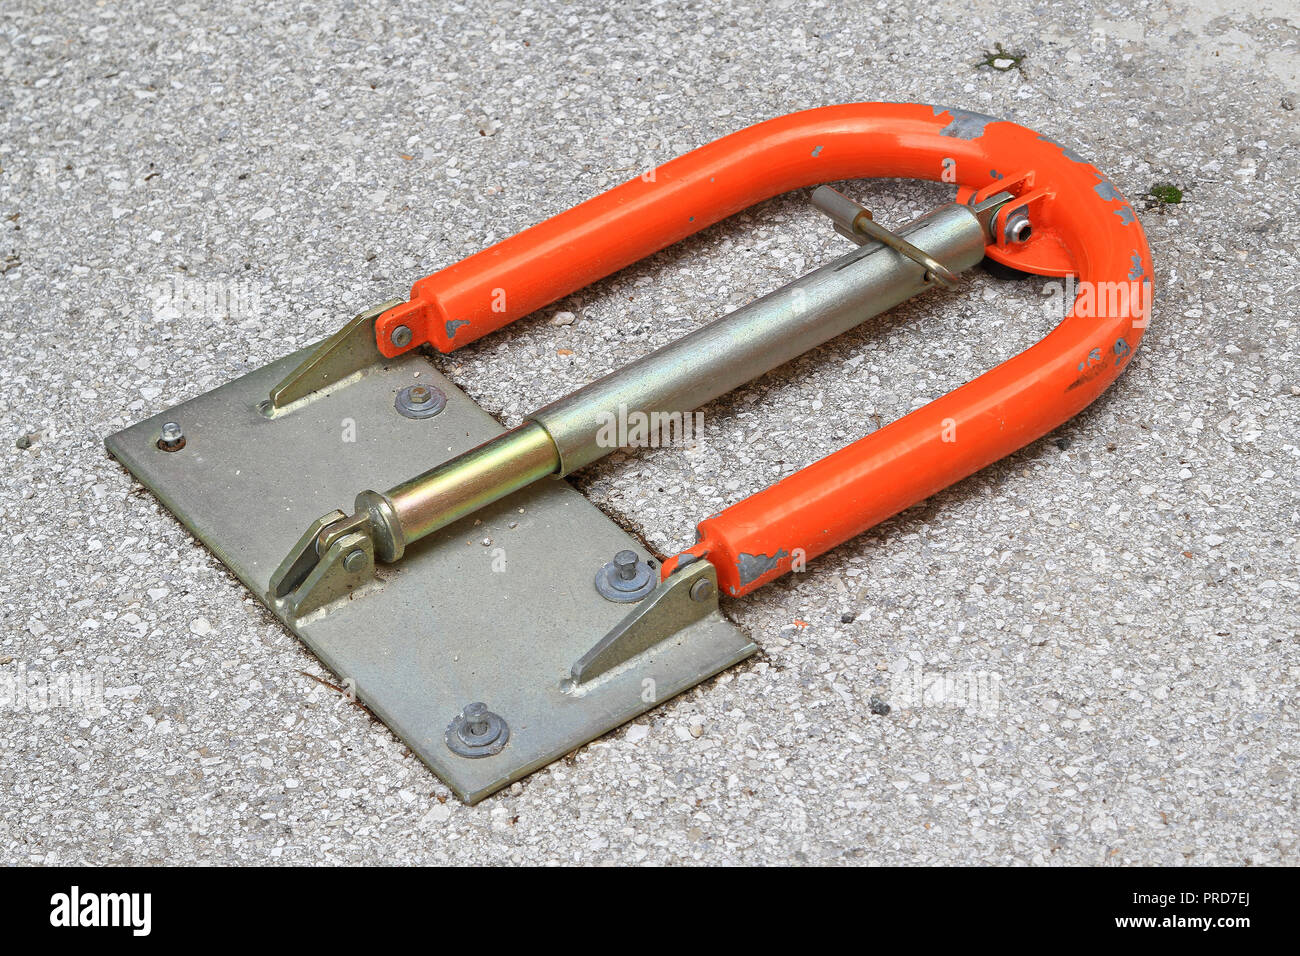 Manual car parking lock and protection barrier Stock Photo - Alamy